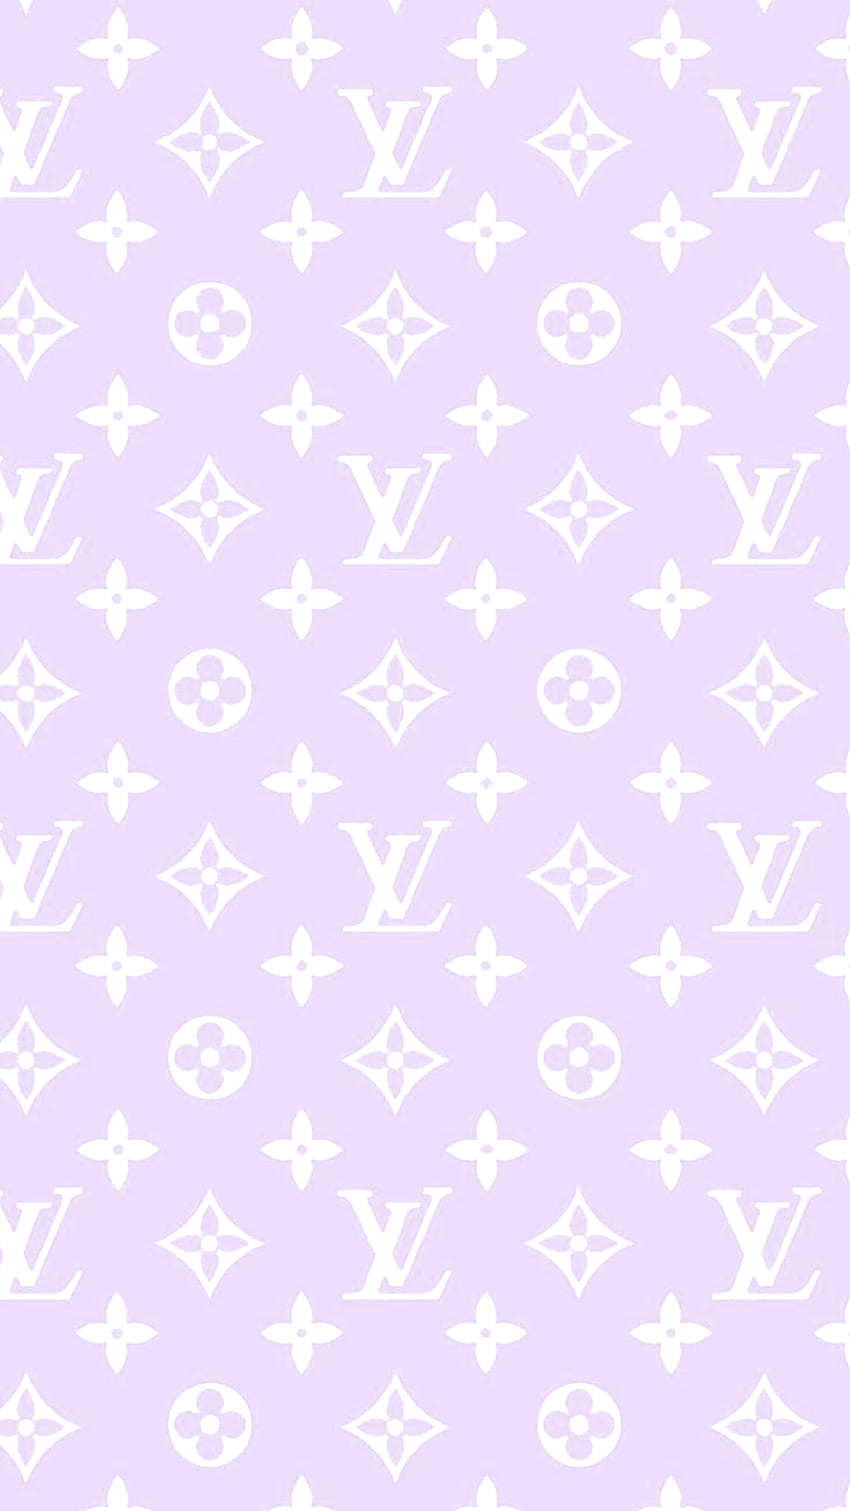 lv background  Iphone wallpaper tumblr aesthetic, Louis vuitton iphone  wallpaper, Purple aesthetic background